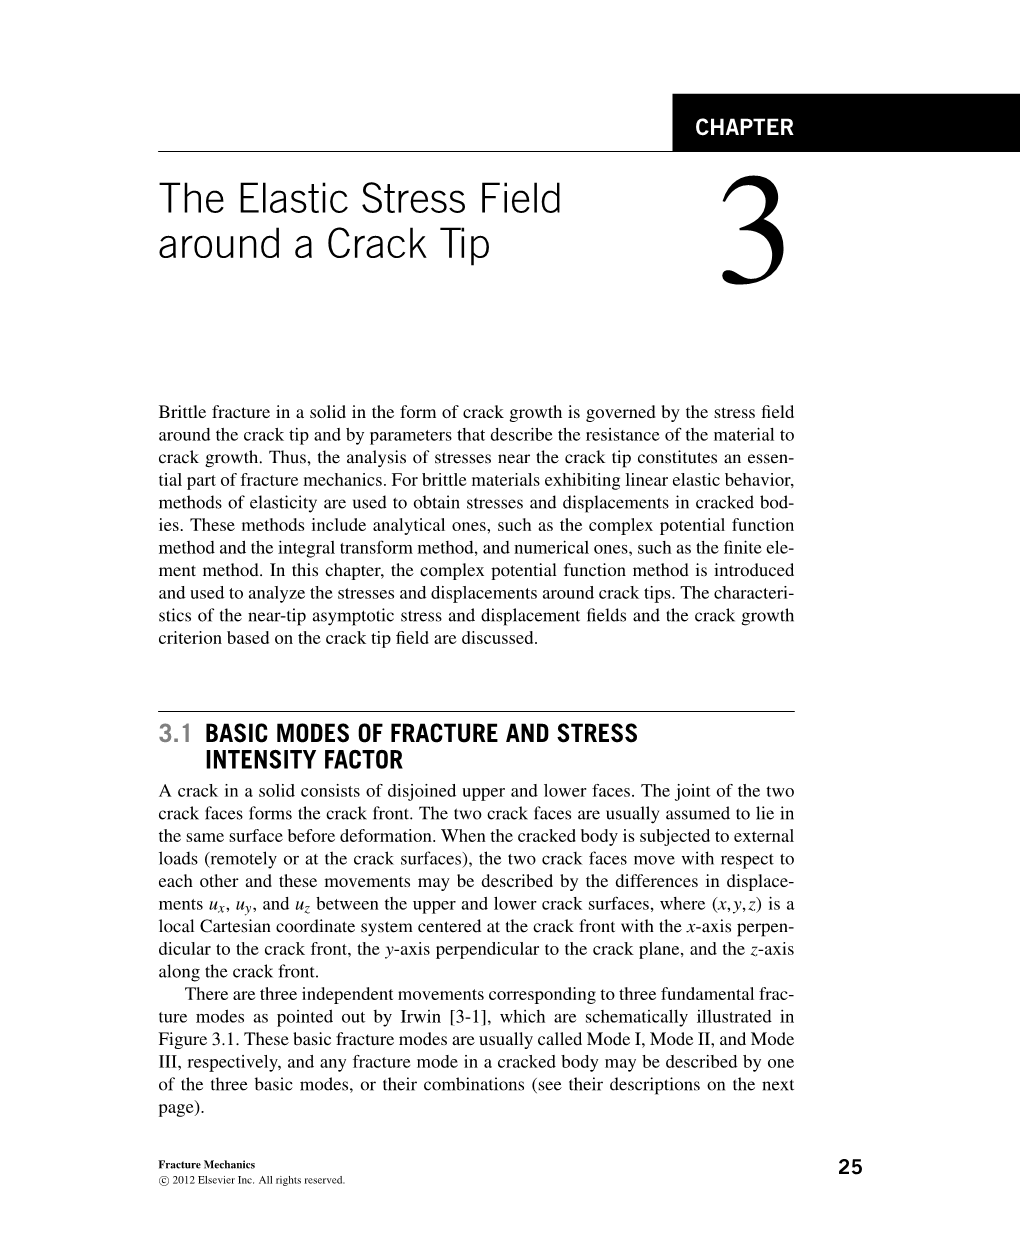 CHAPTER 3 the Elastic Stress Field Around a Crack Tip